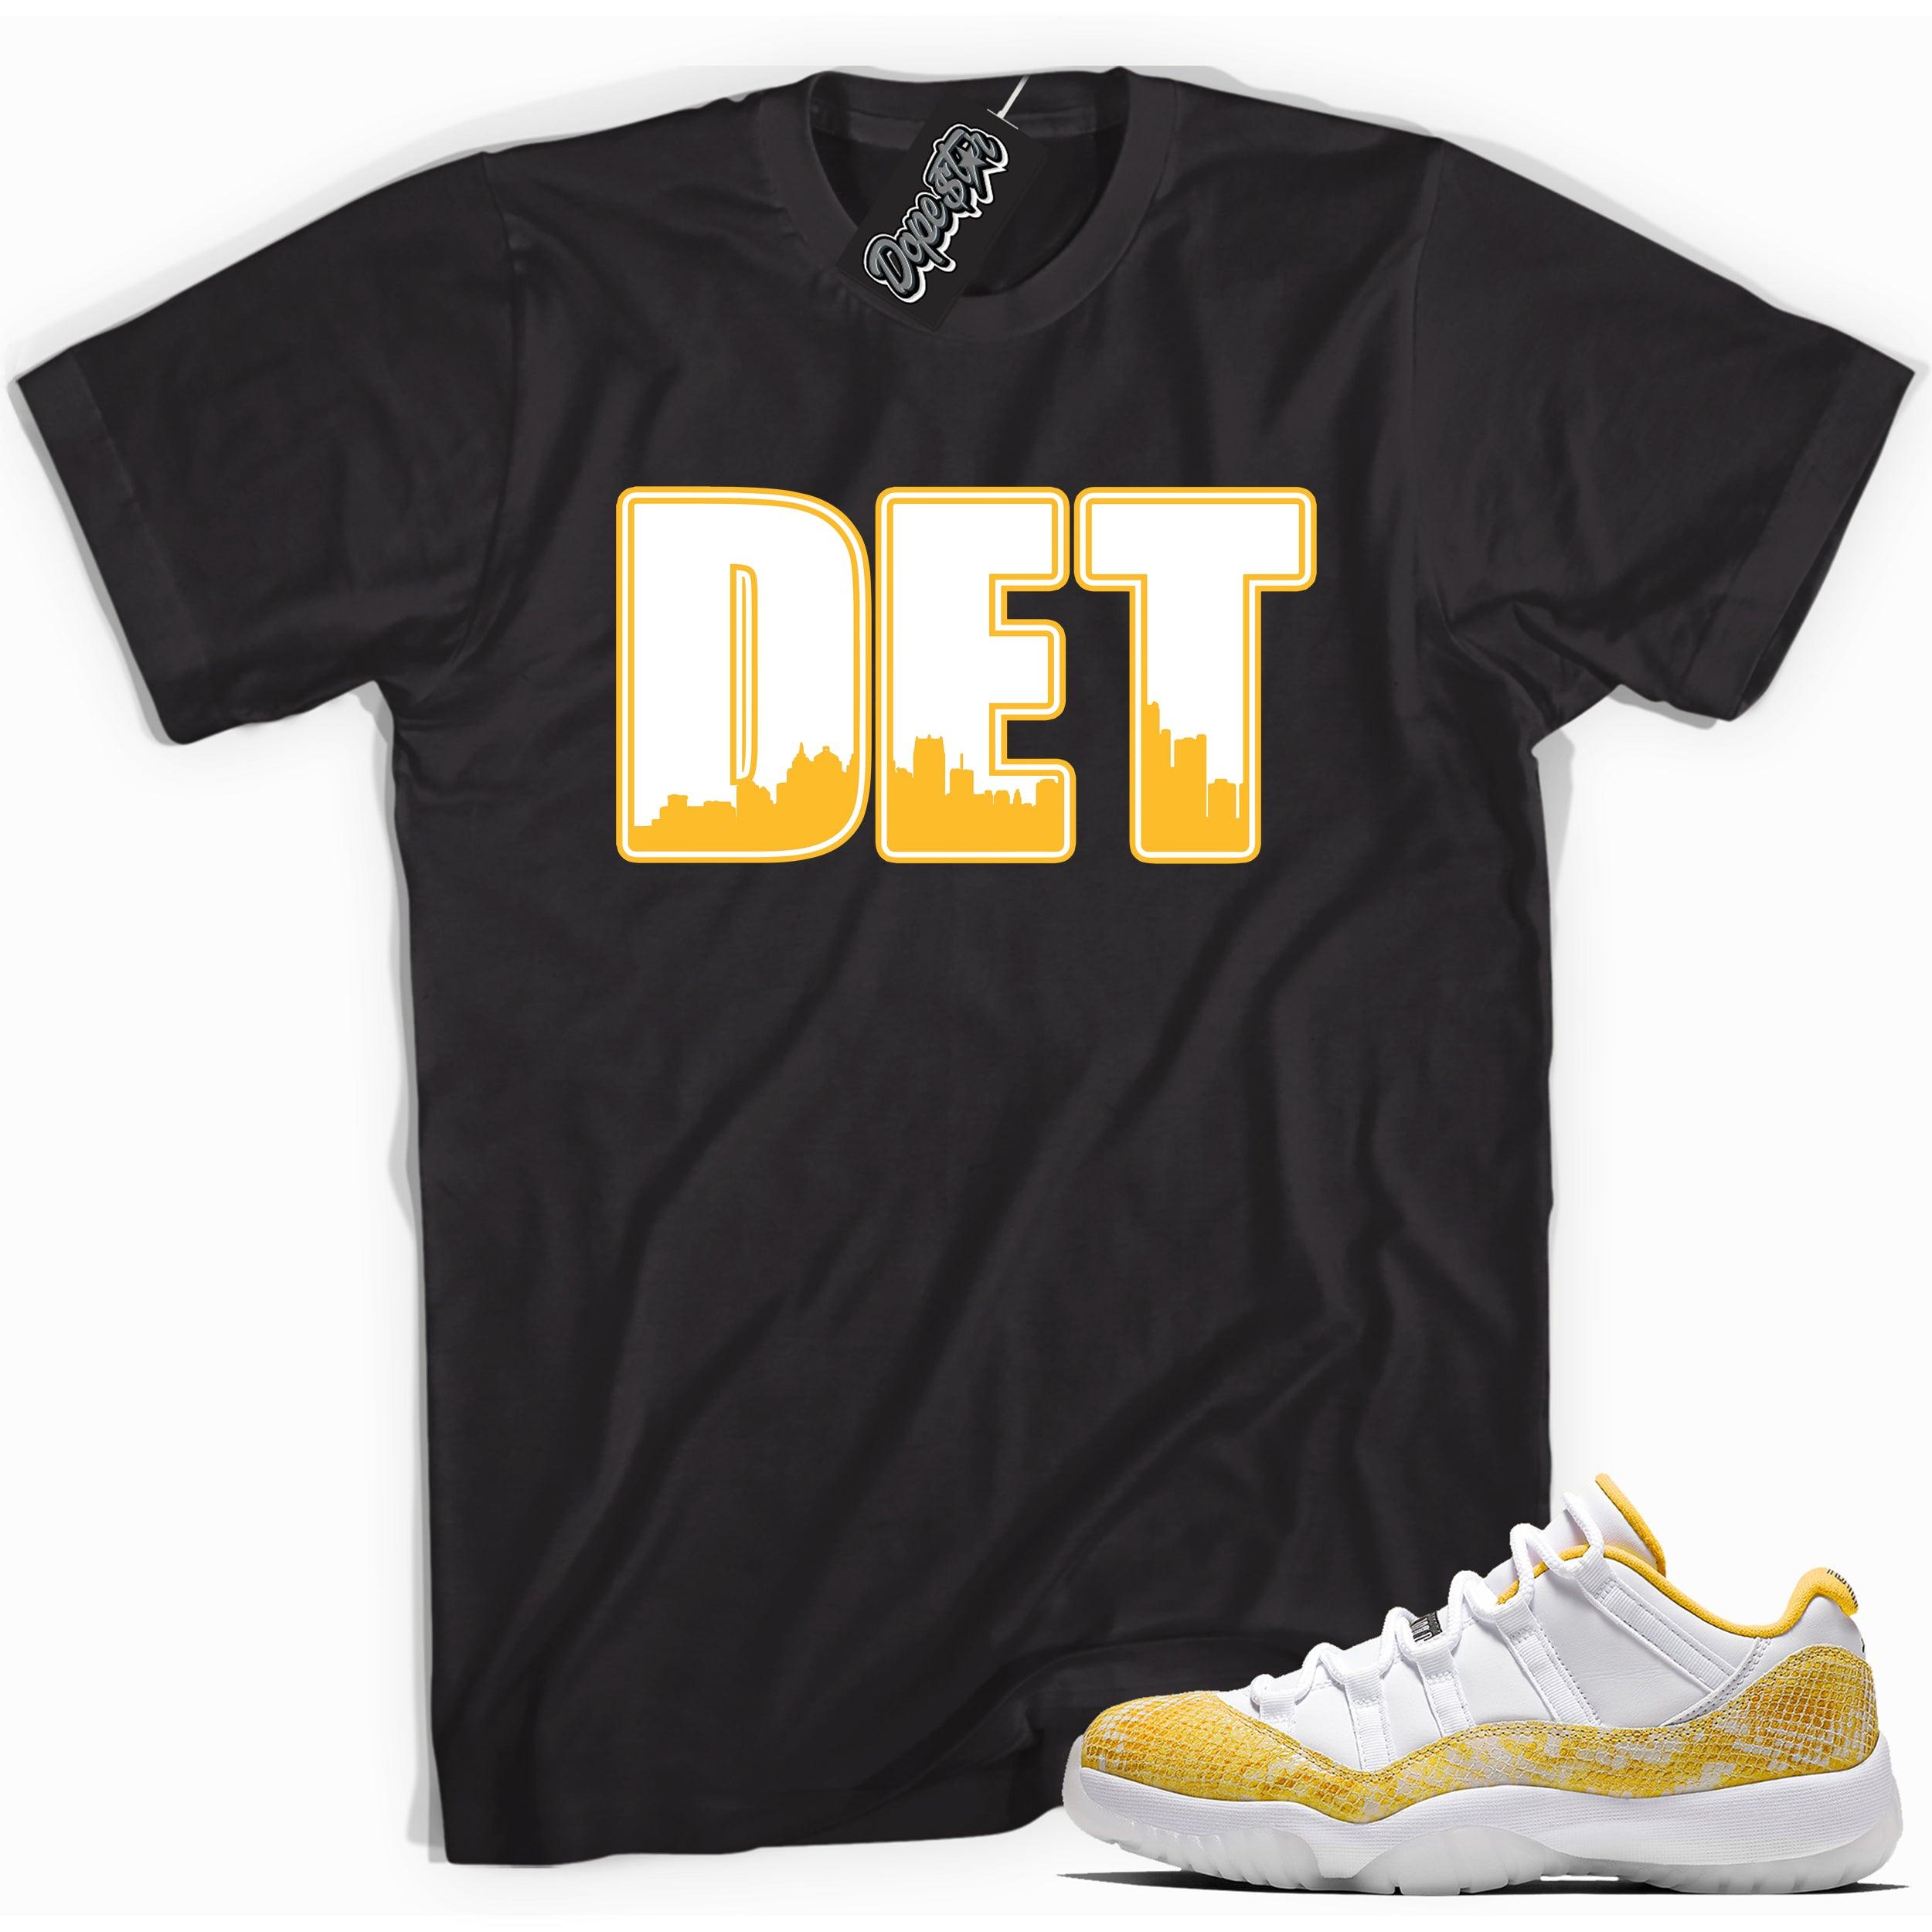 Cool black graphic tee with 'DET' print, that perfectly matches  Air Jordan 11 Low Yellow Snakeskin sneakers